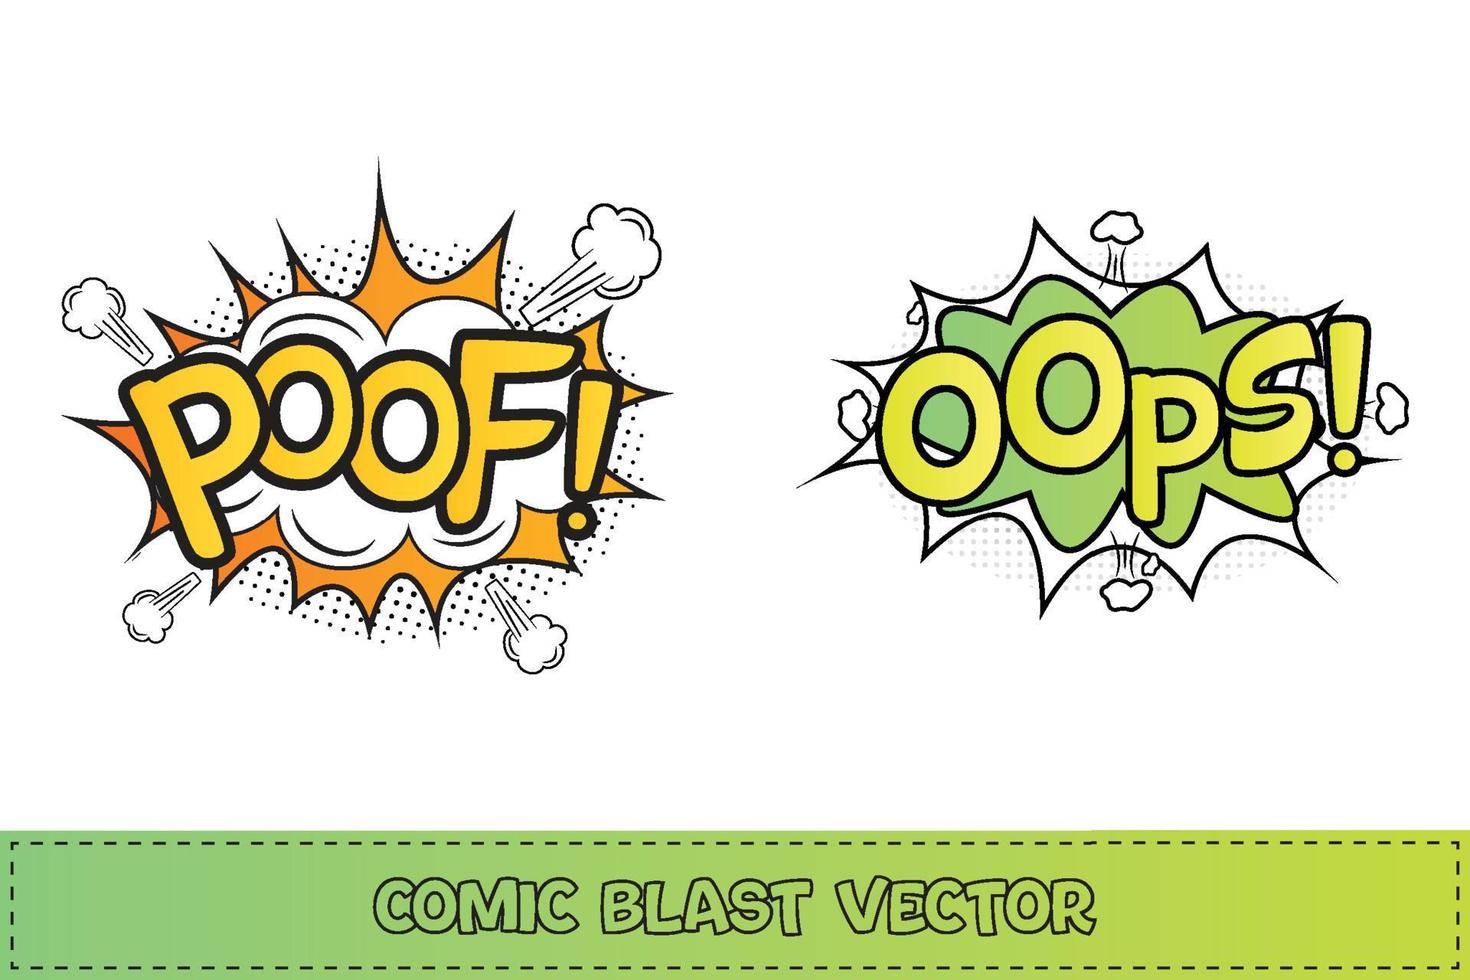 Poof comic explosion with white and yellow color. Oops, comic pop-up with light green, yellow, and white color. Comic burst with colorful Oops and Poof. Poof explosion bubbles for cartoon speeches. vector